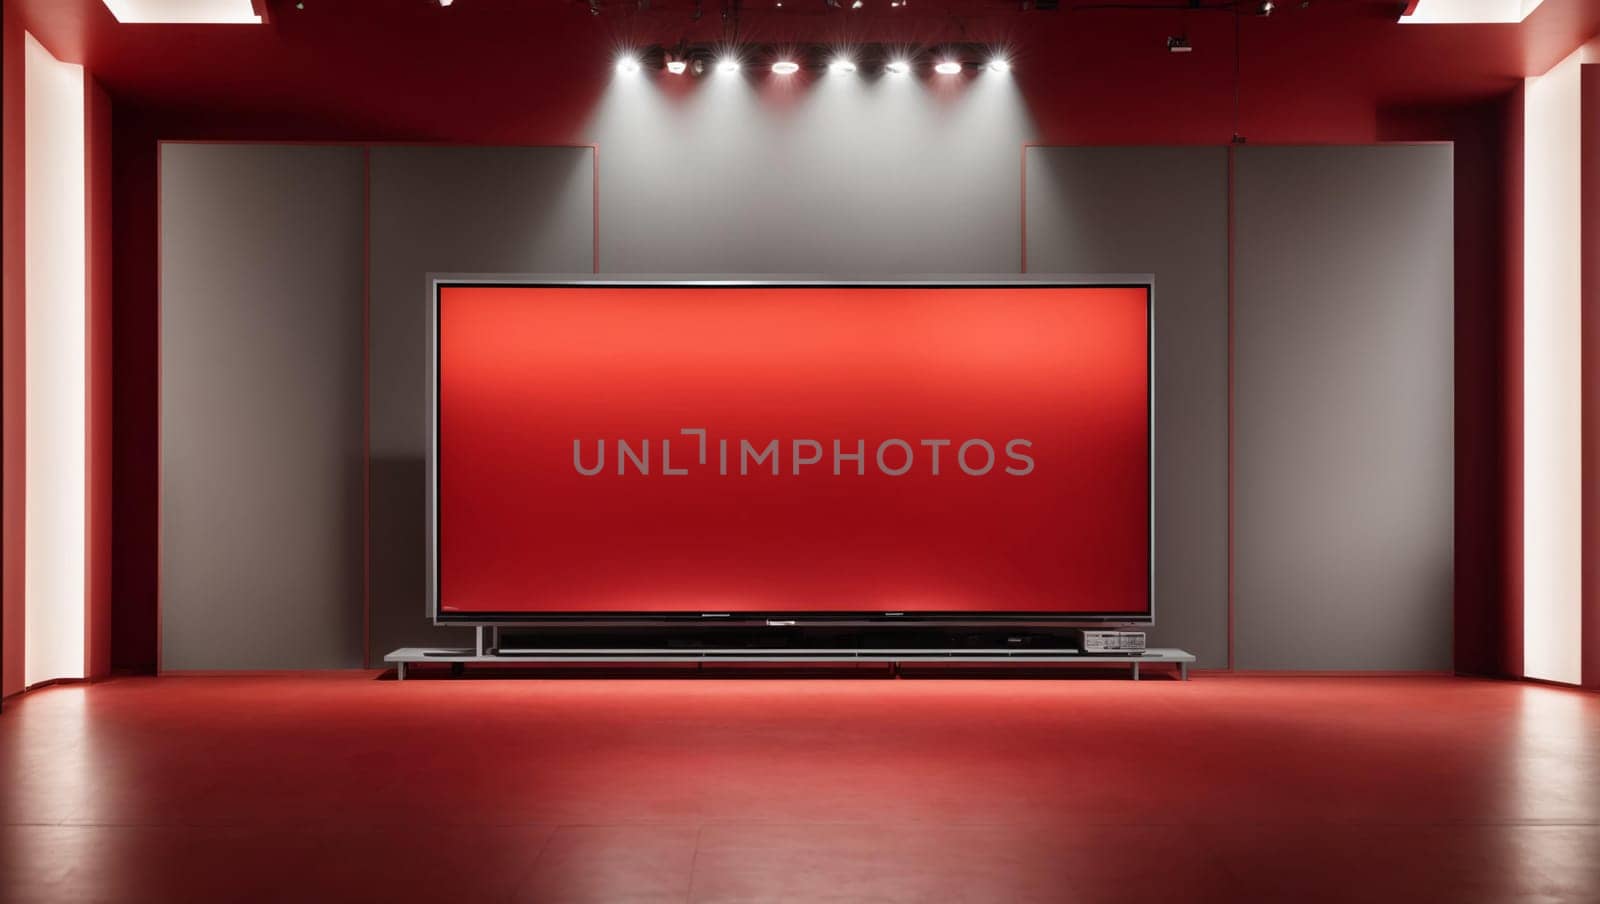 rectangular red TV screen with backlight, without image, located in the center, right on the red background of the studio